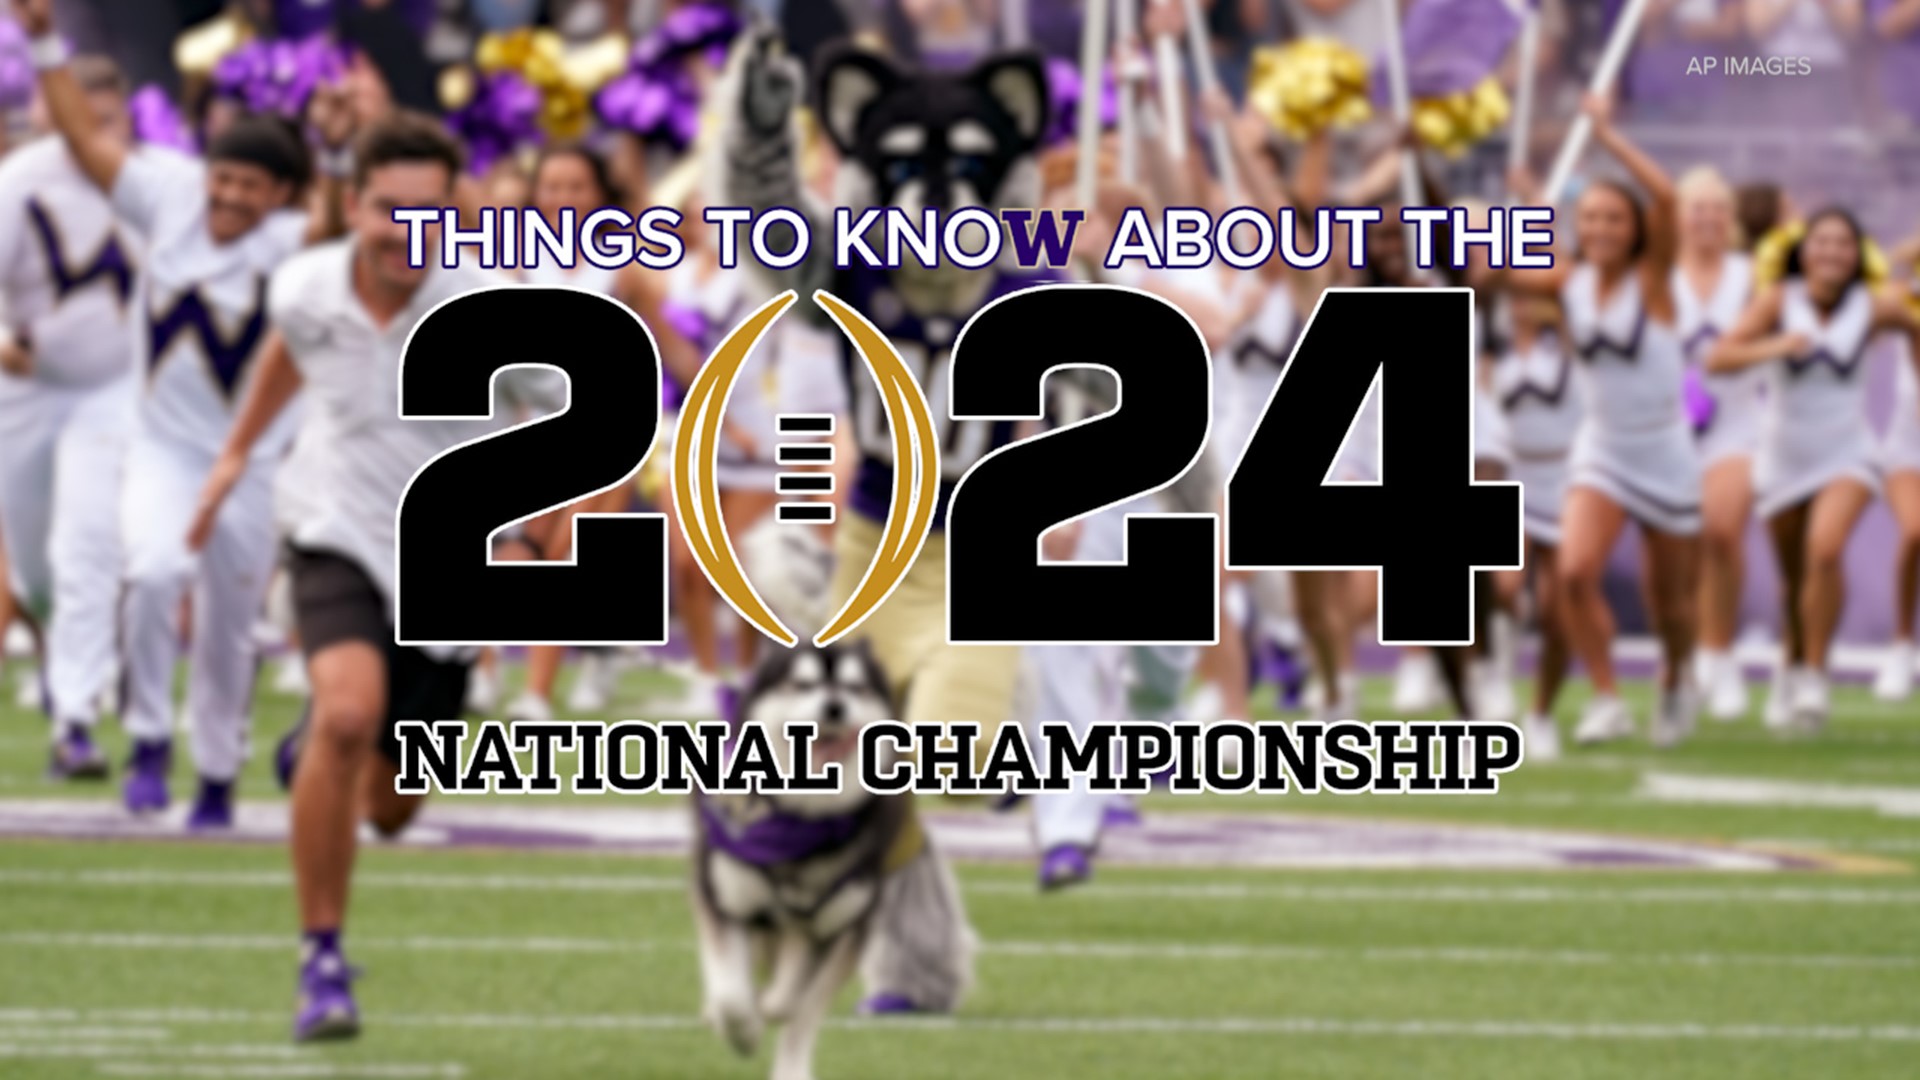 Here's what you should know about the 2024 College Football Playoff National Championship Game between the Washington Huskies and the Michigan Wolverines.